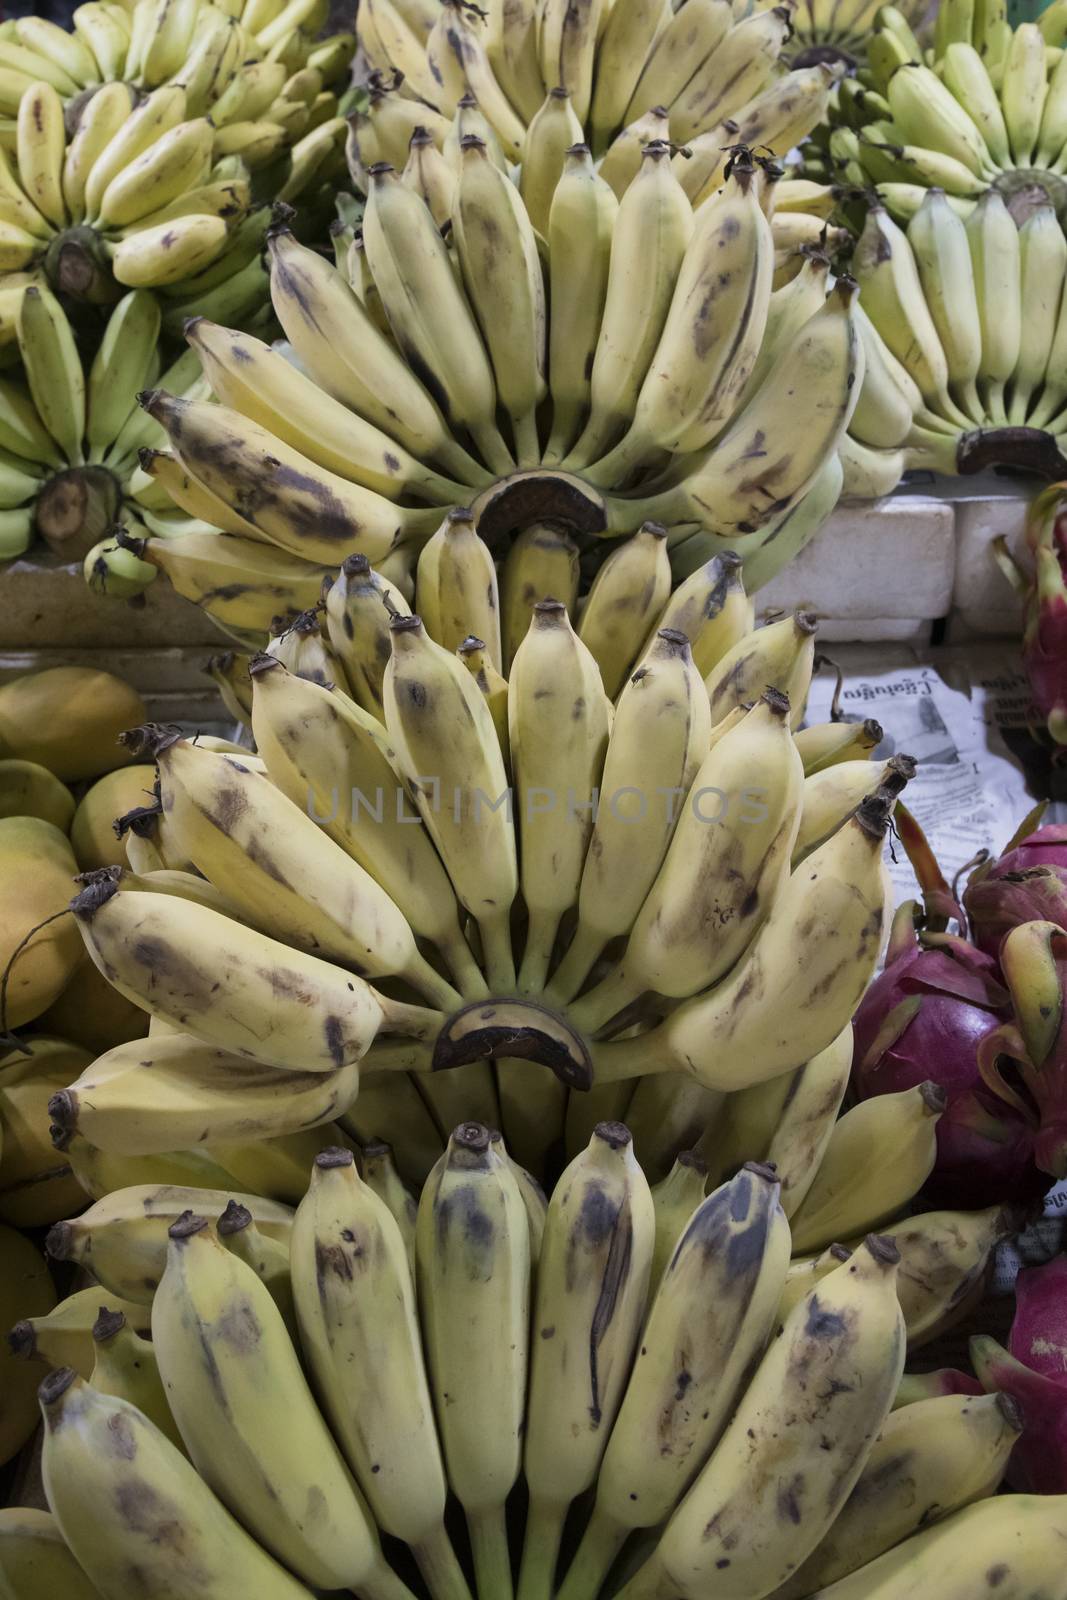 Siem Reap, Cambodia, 28 March 2018. Bananas at the Fresh Food Market of the city